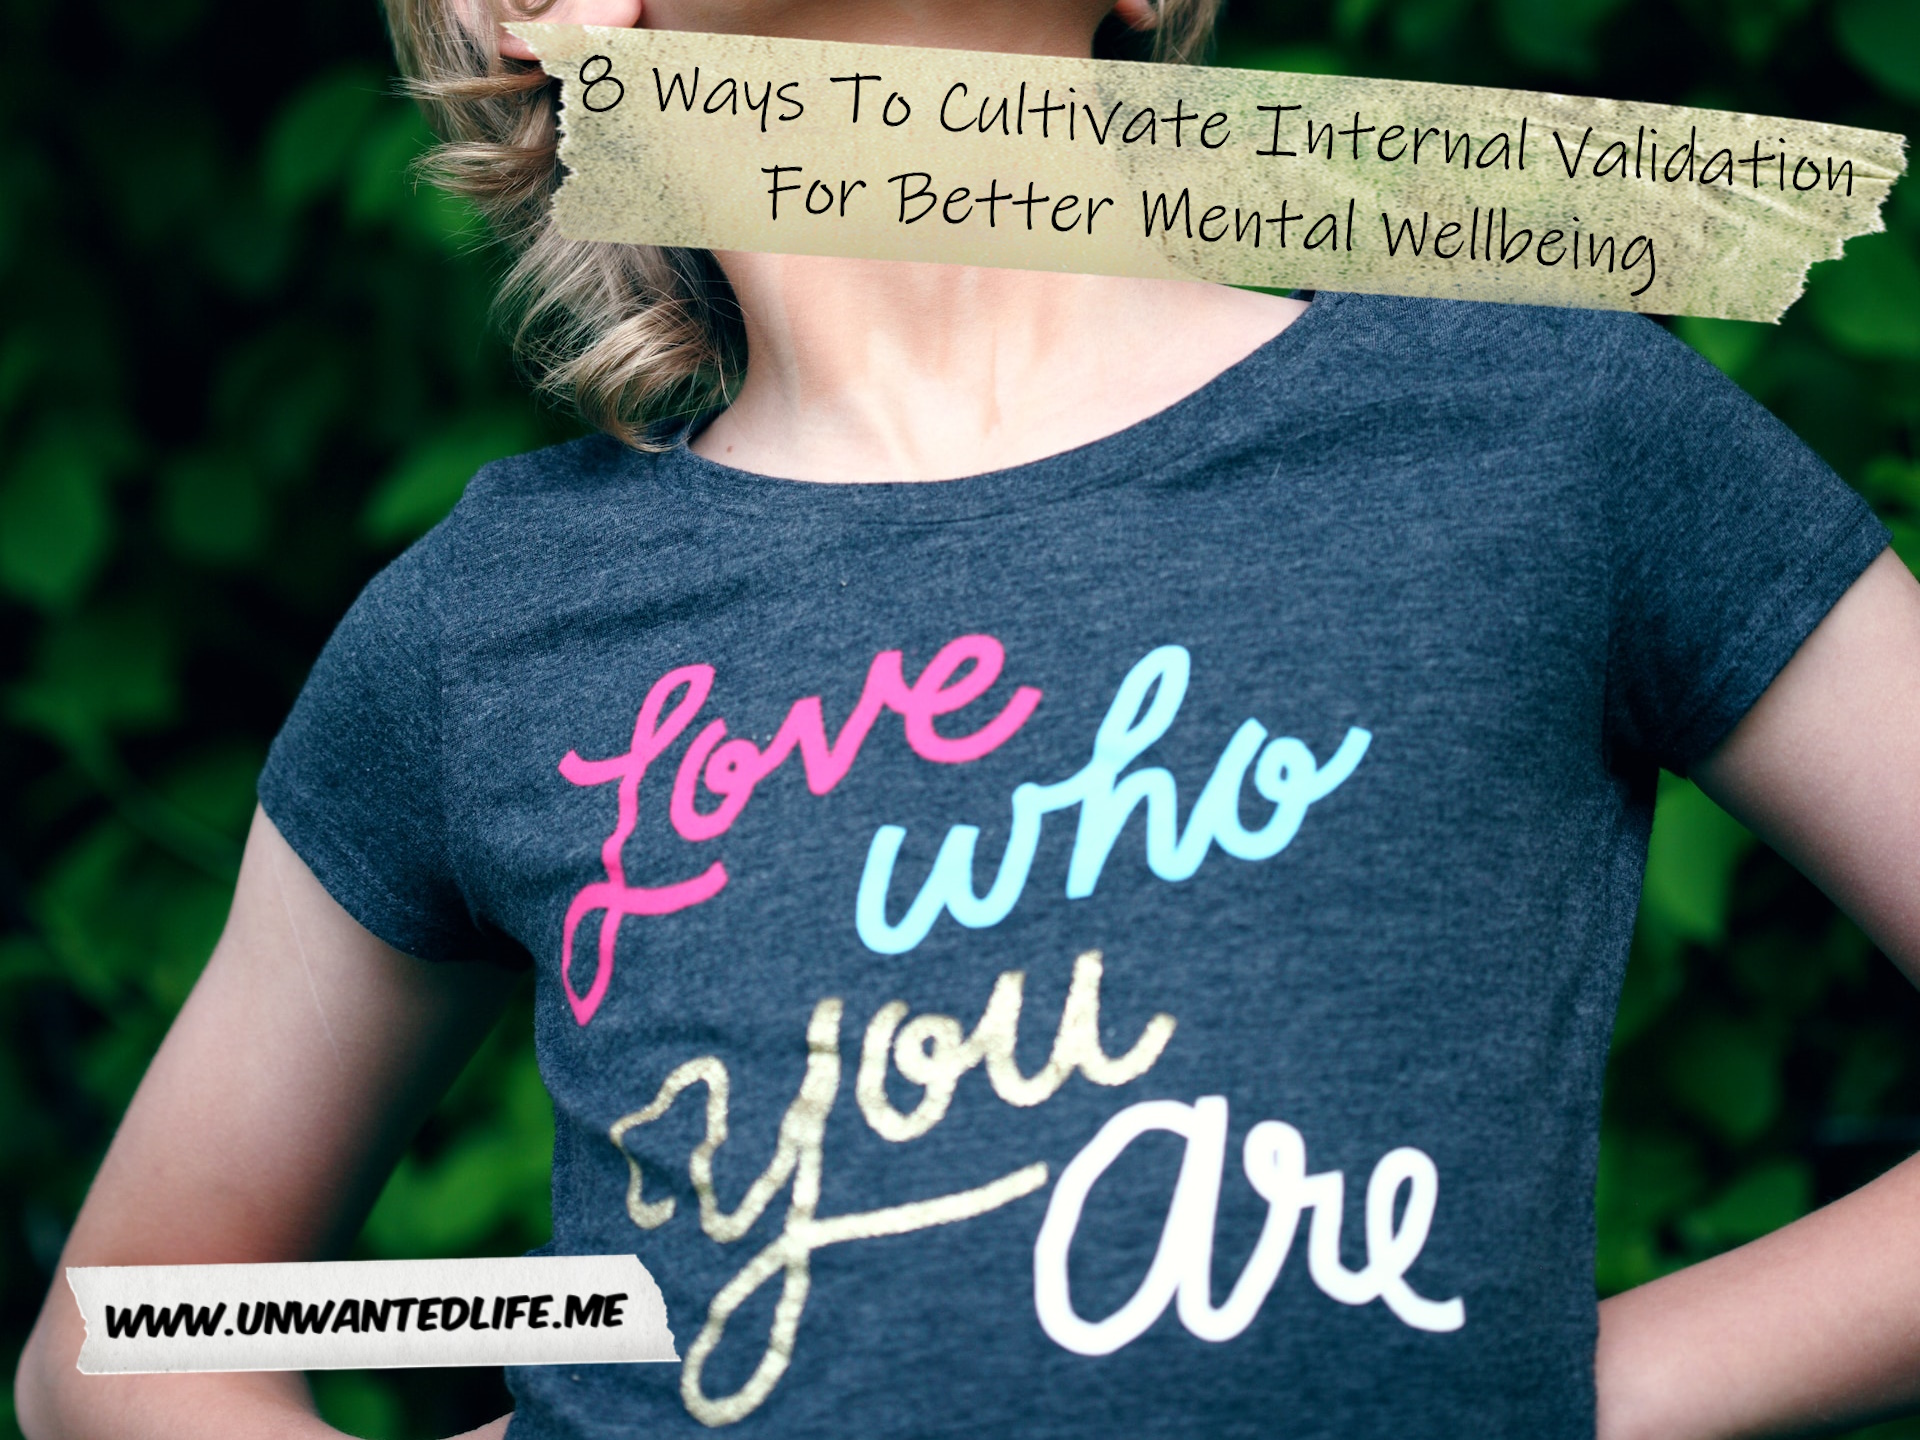 A photo of a White child wearing a t-shirt that says "love who you are" to represent the topic of the article - 8 Ways To Cultivate Internal Validation For Better Mental Wellbeing